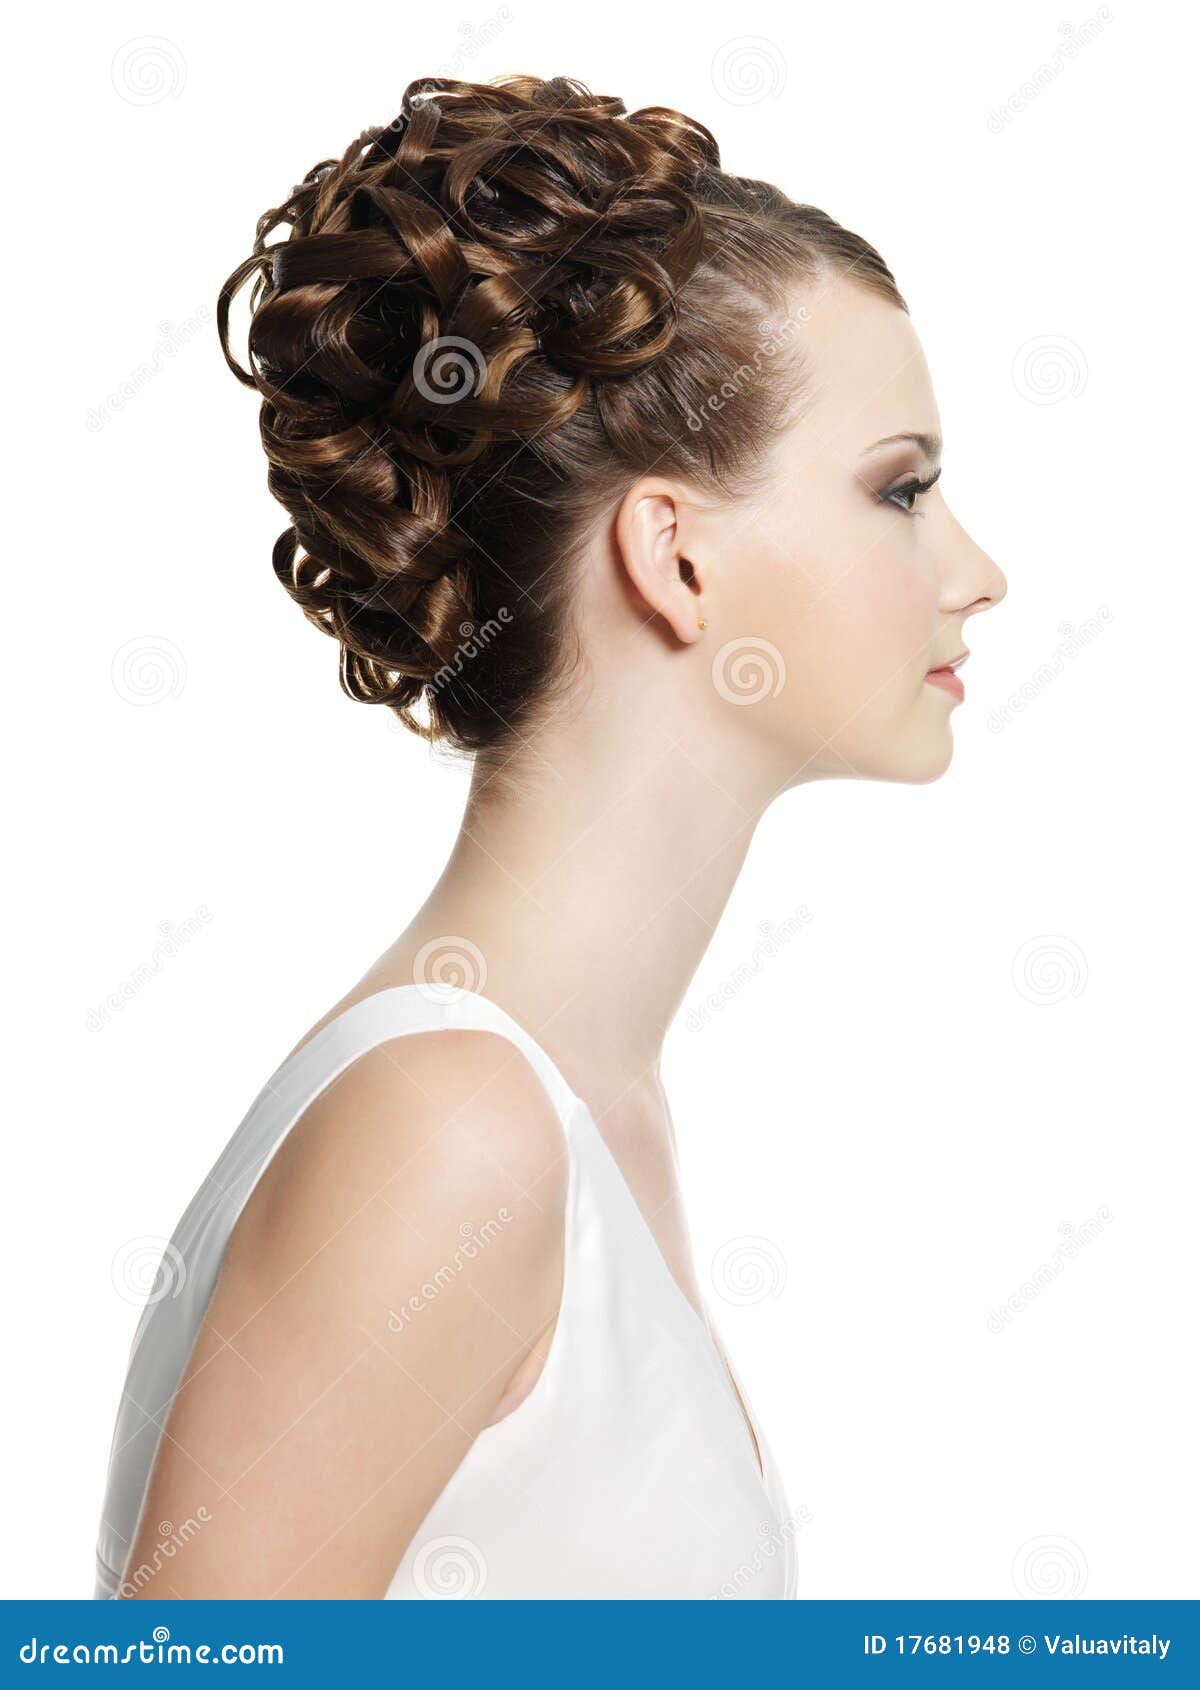 27,121 Hairstyle Profile Stock Photos - Free & Royalty-Free Stock Photos  from Dreamstime